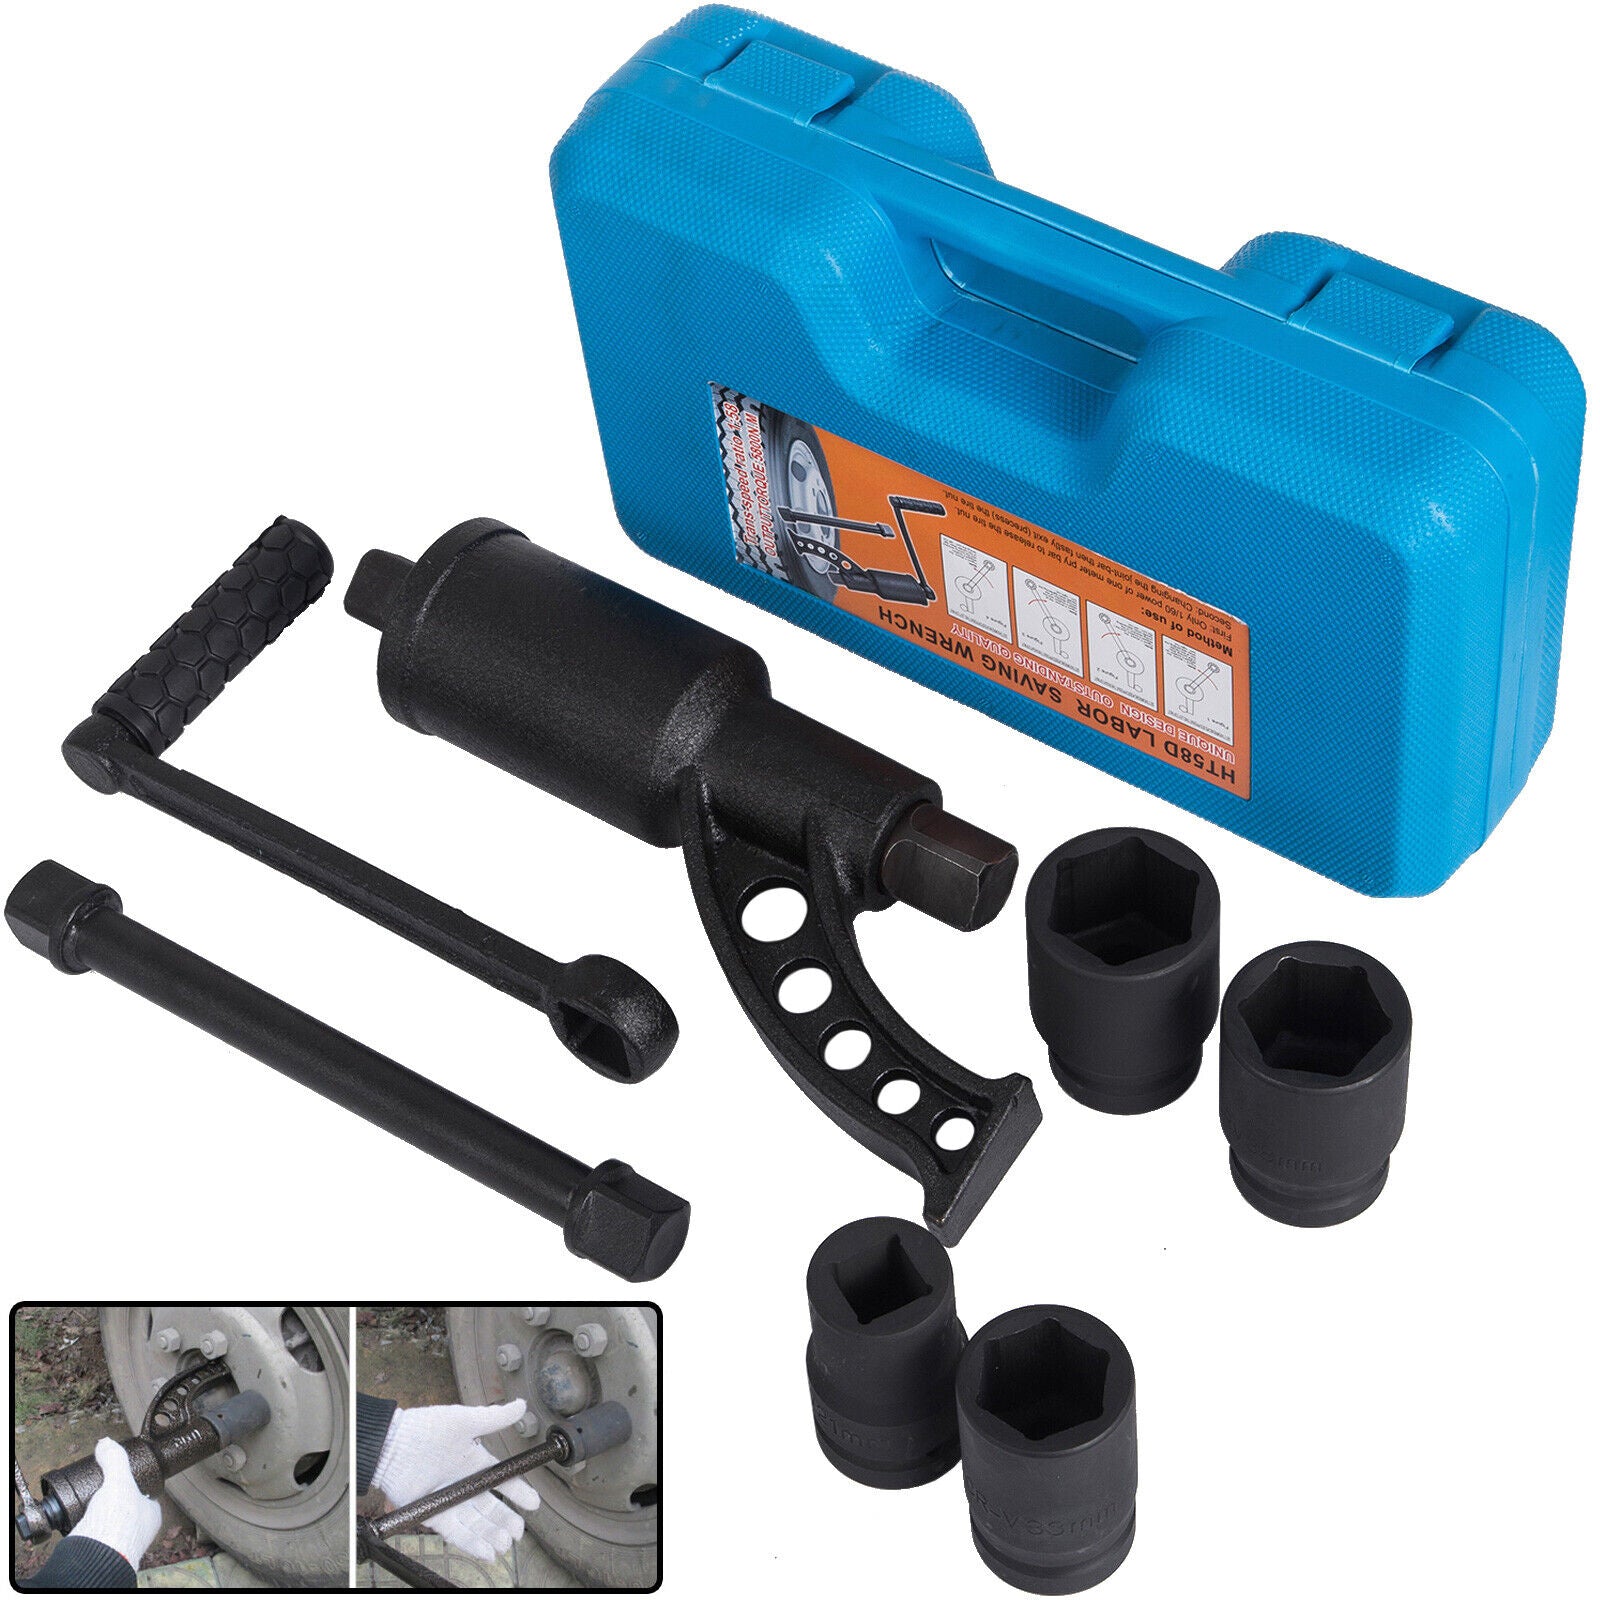 1:58 Gear Ratio Torque Multiplier Set Wrench Lug Nut with 4pcs 21-41mmSockets Remover Lugnut